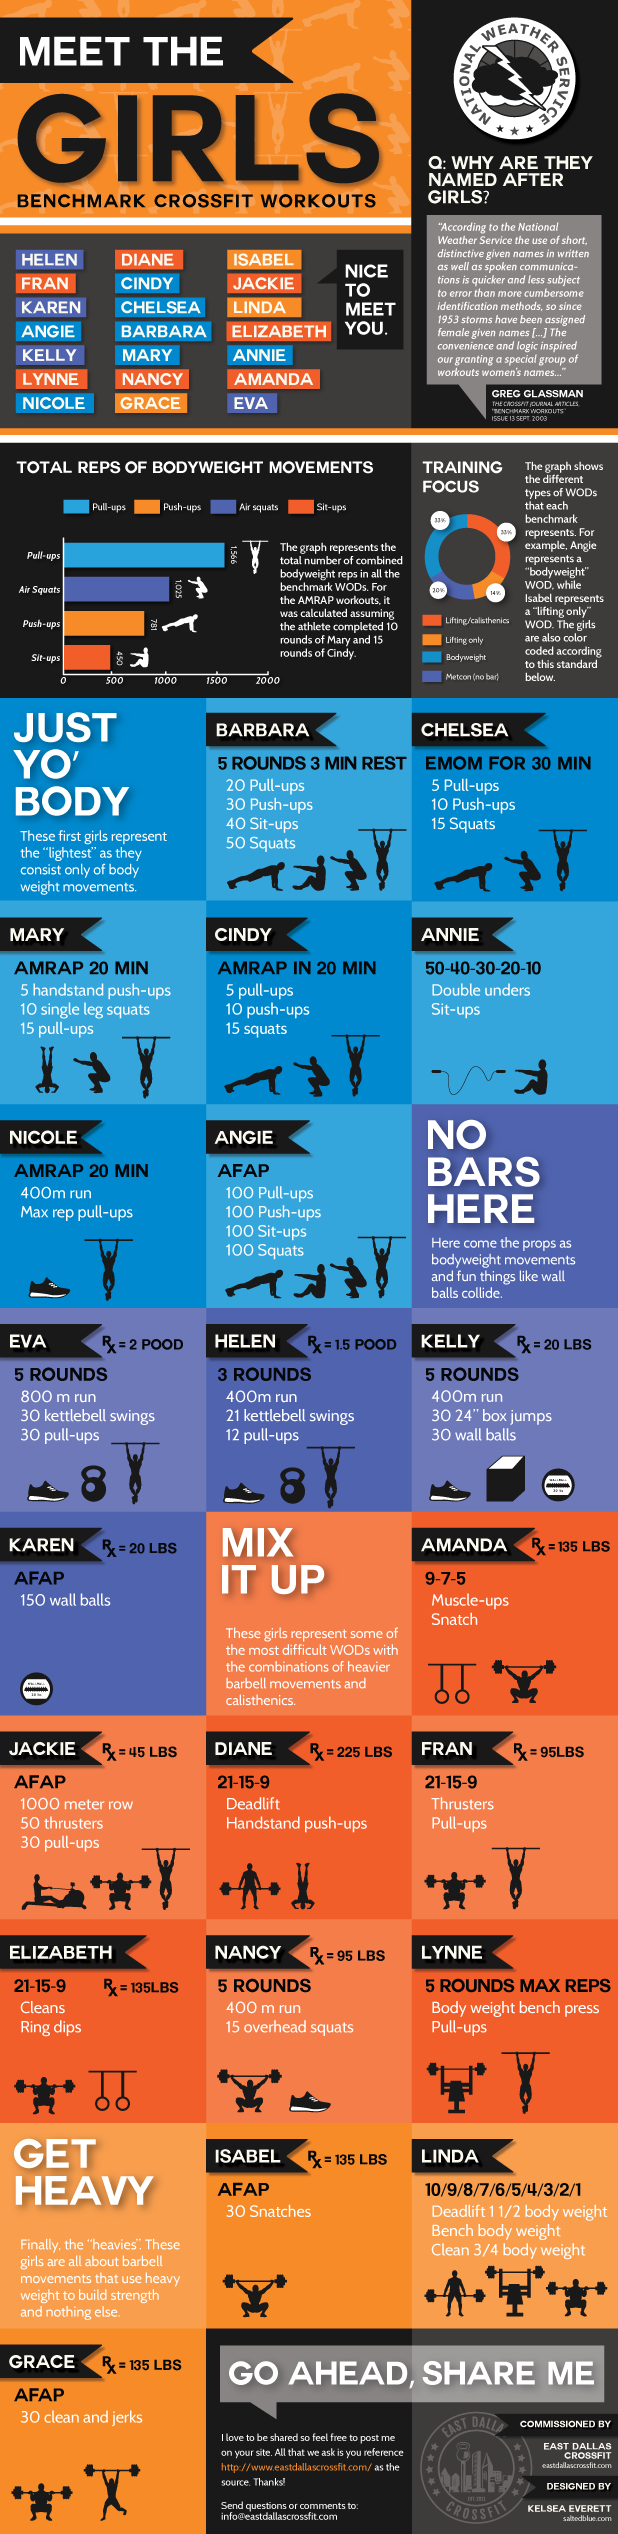 Meet The Girls CrossFit Benchmark Workouts Infographic